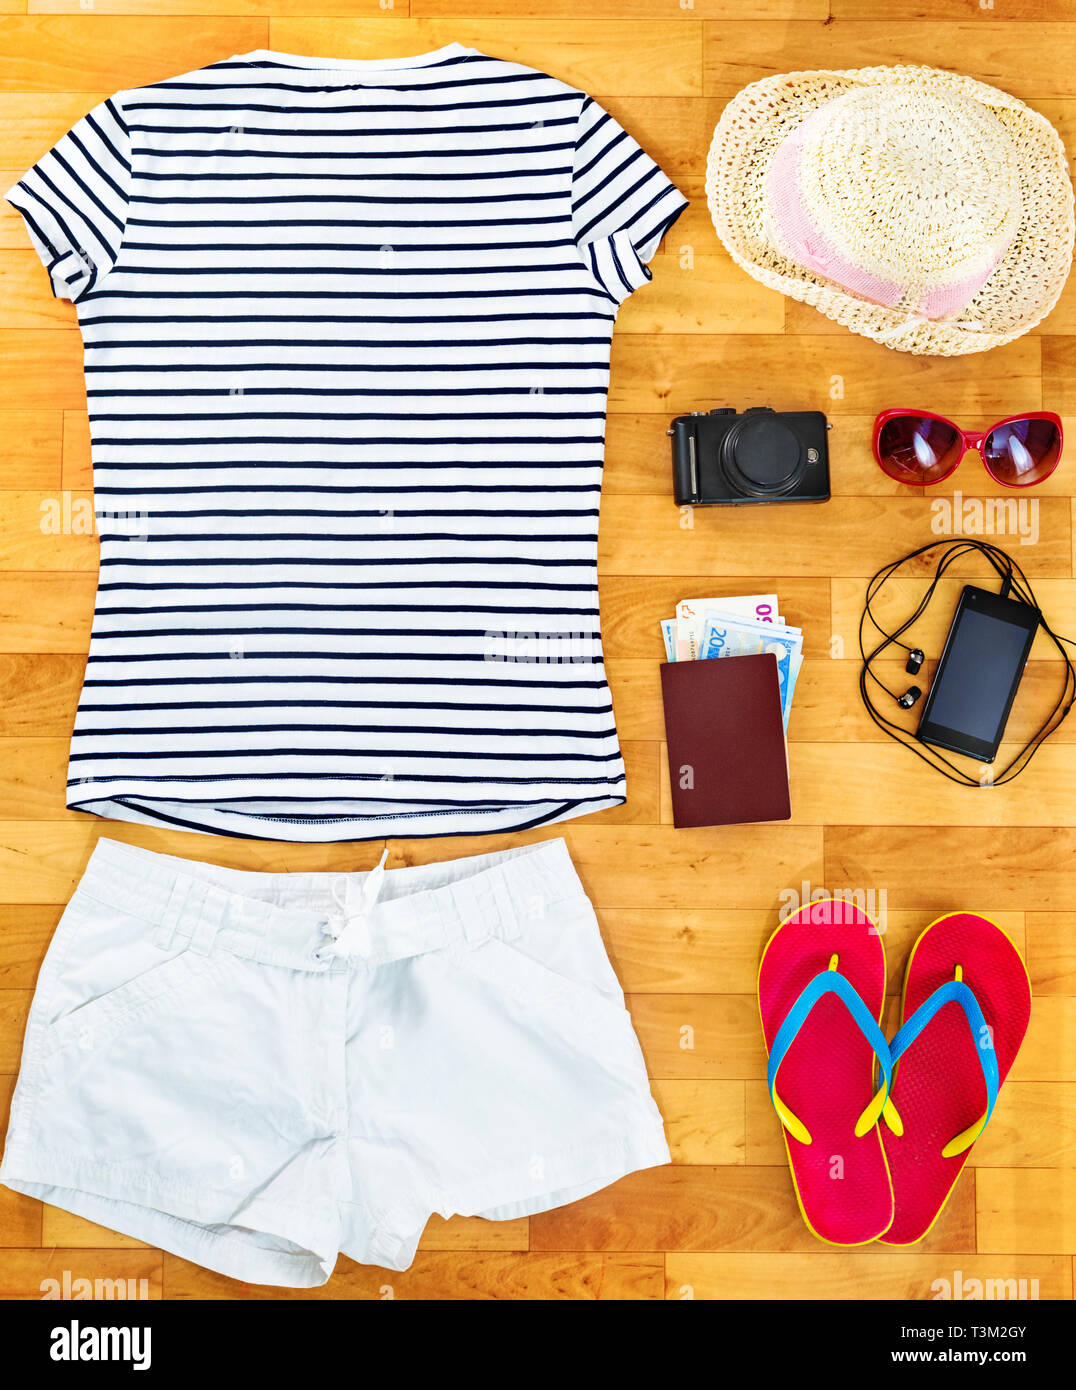 packing suitcase for summer vacation Stock Photo